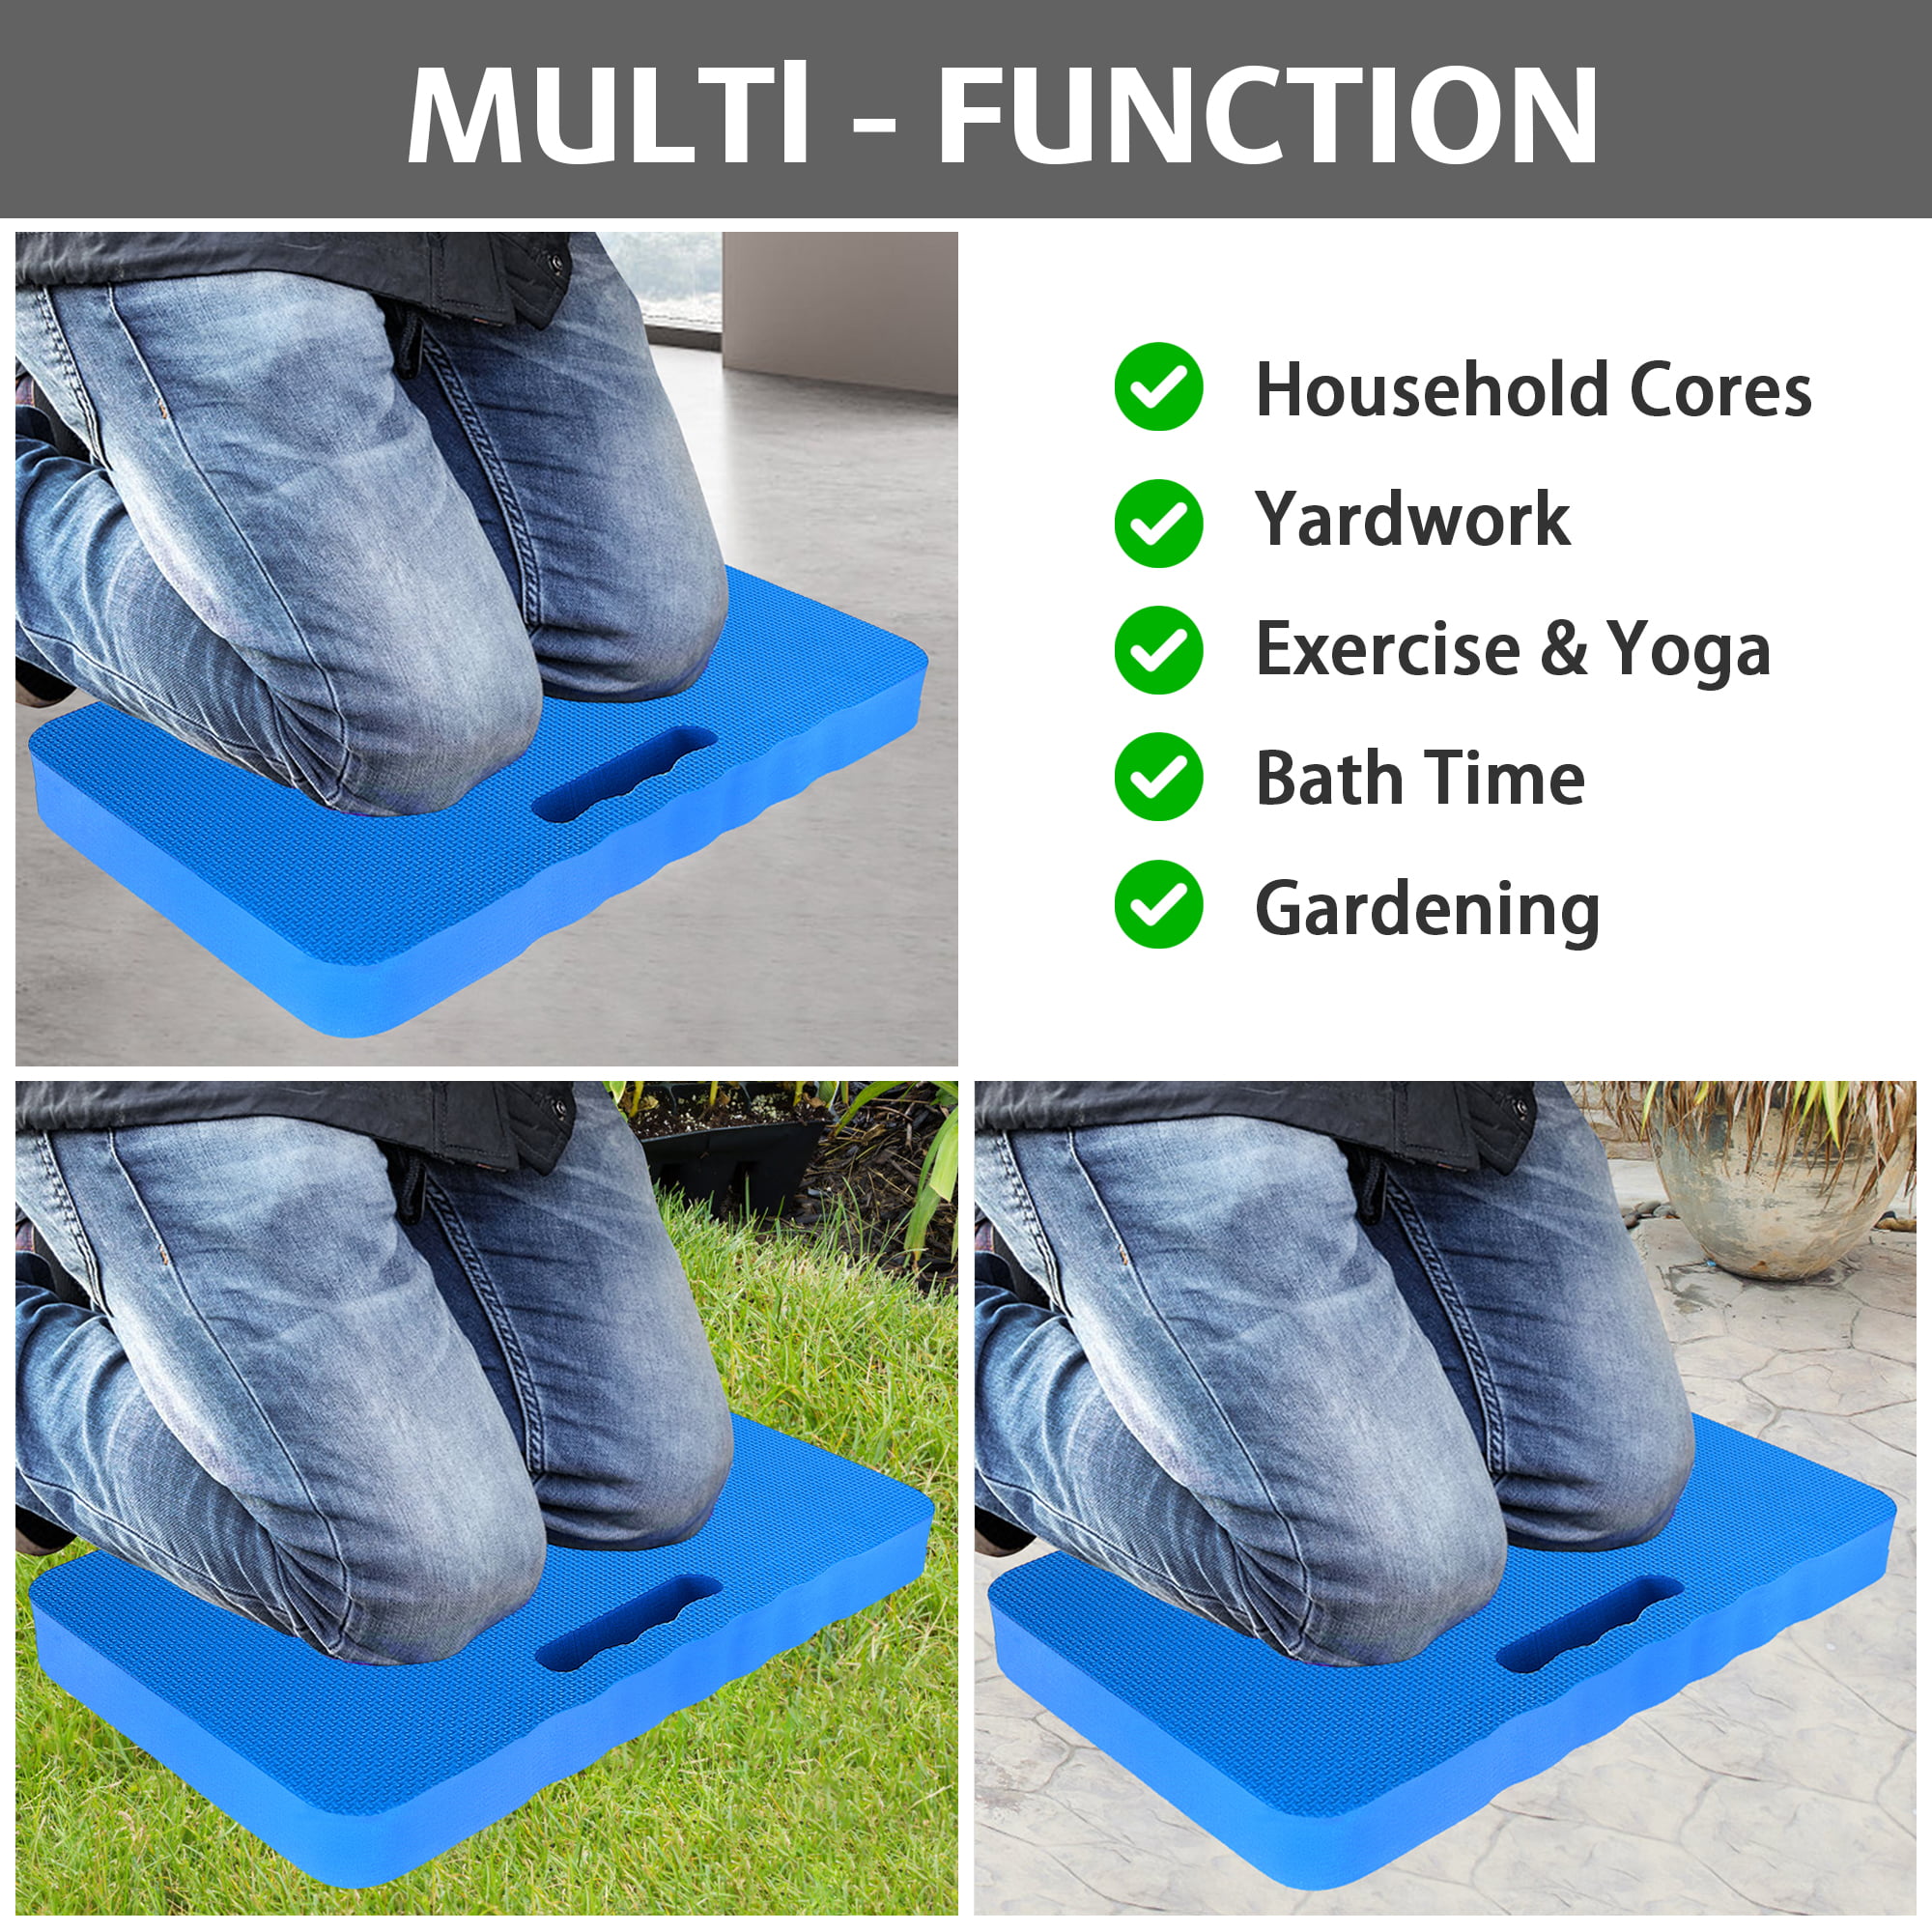 Kneeling Pad 12x22 in - AND432